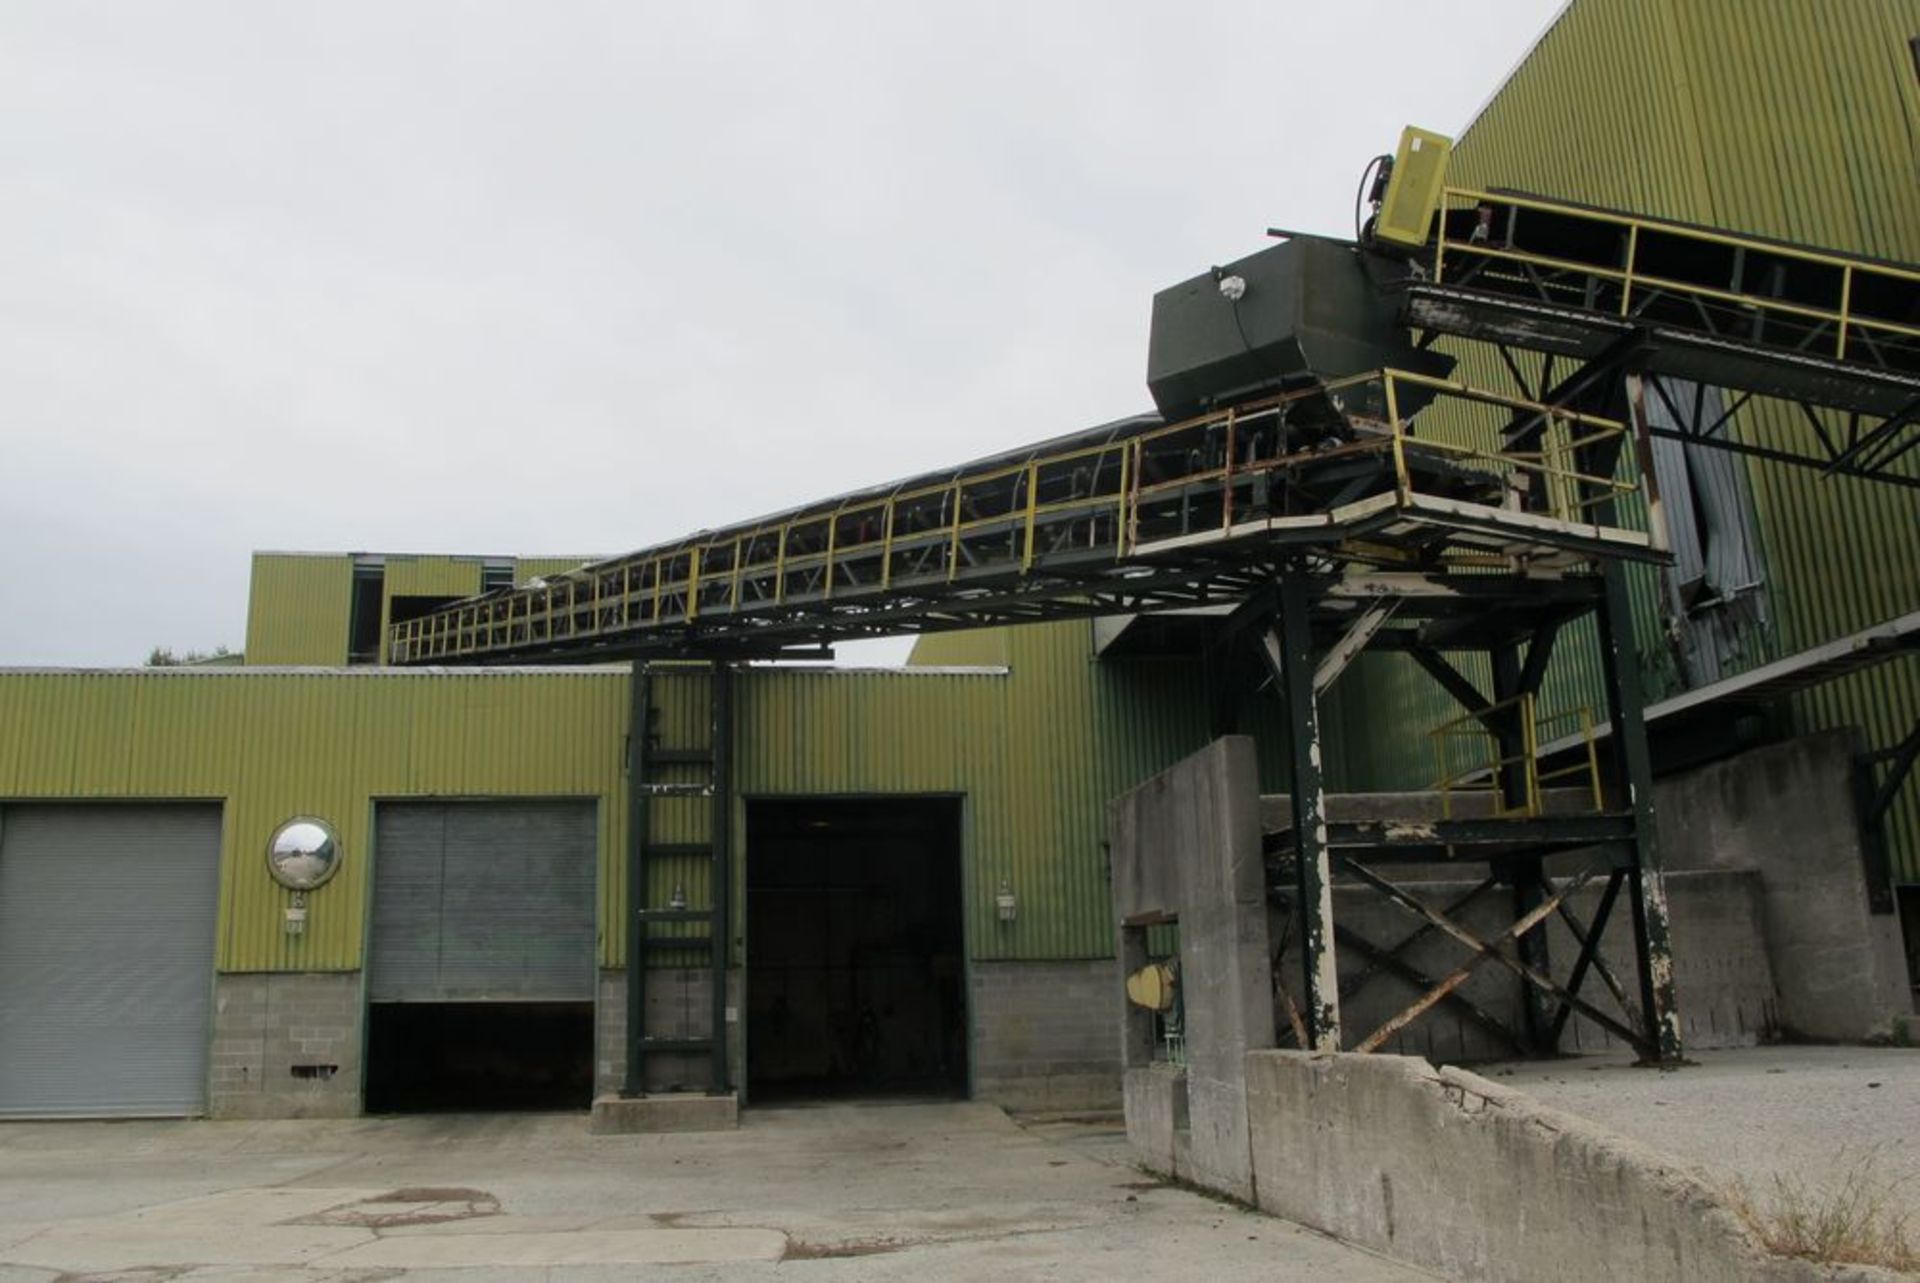 LOT OF 2 45"W INCLINE RUBBERT BELT CONVEYORS 80'L AND 120'L FROM CHIPPER BLDG TO TOP FLOOR OF WOOD - Image 3 of 7